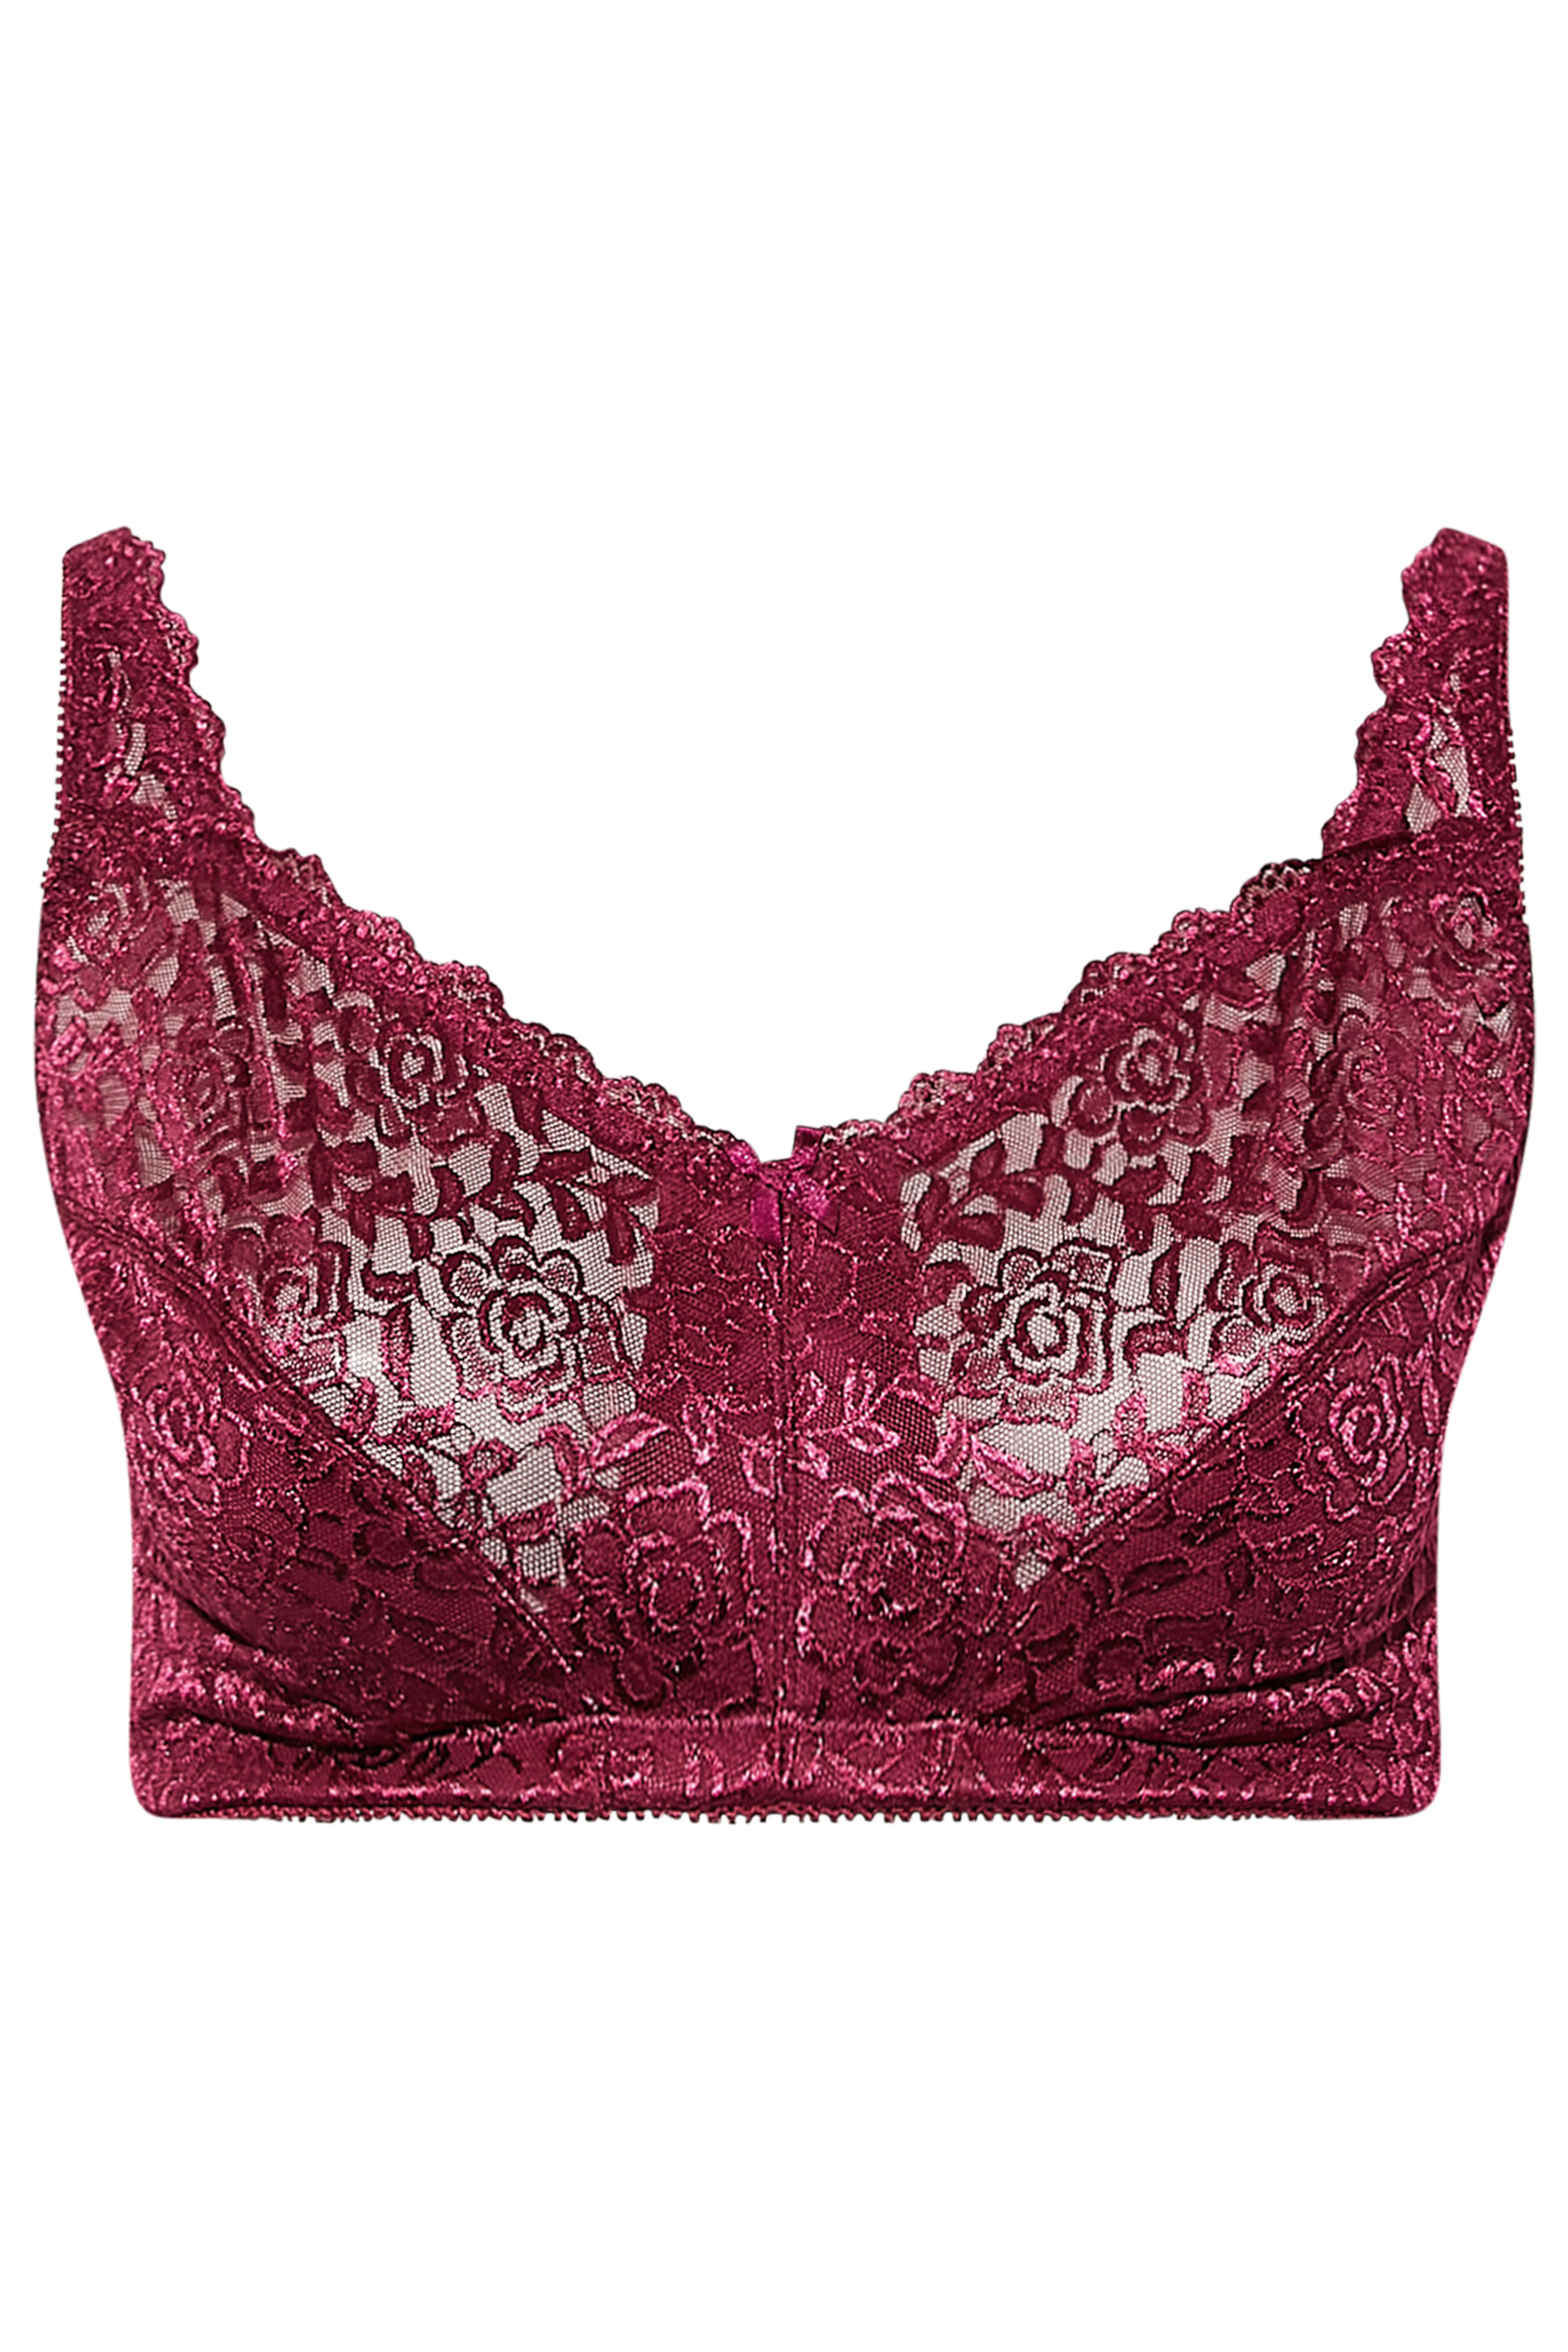 YOURS Burgundy Red Hi Shine Lace Non-Padded Non-Wired Full Cup Bra